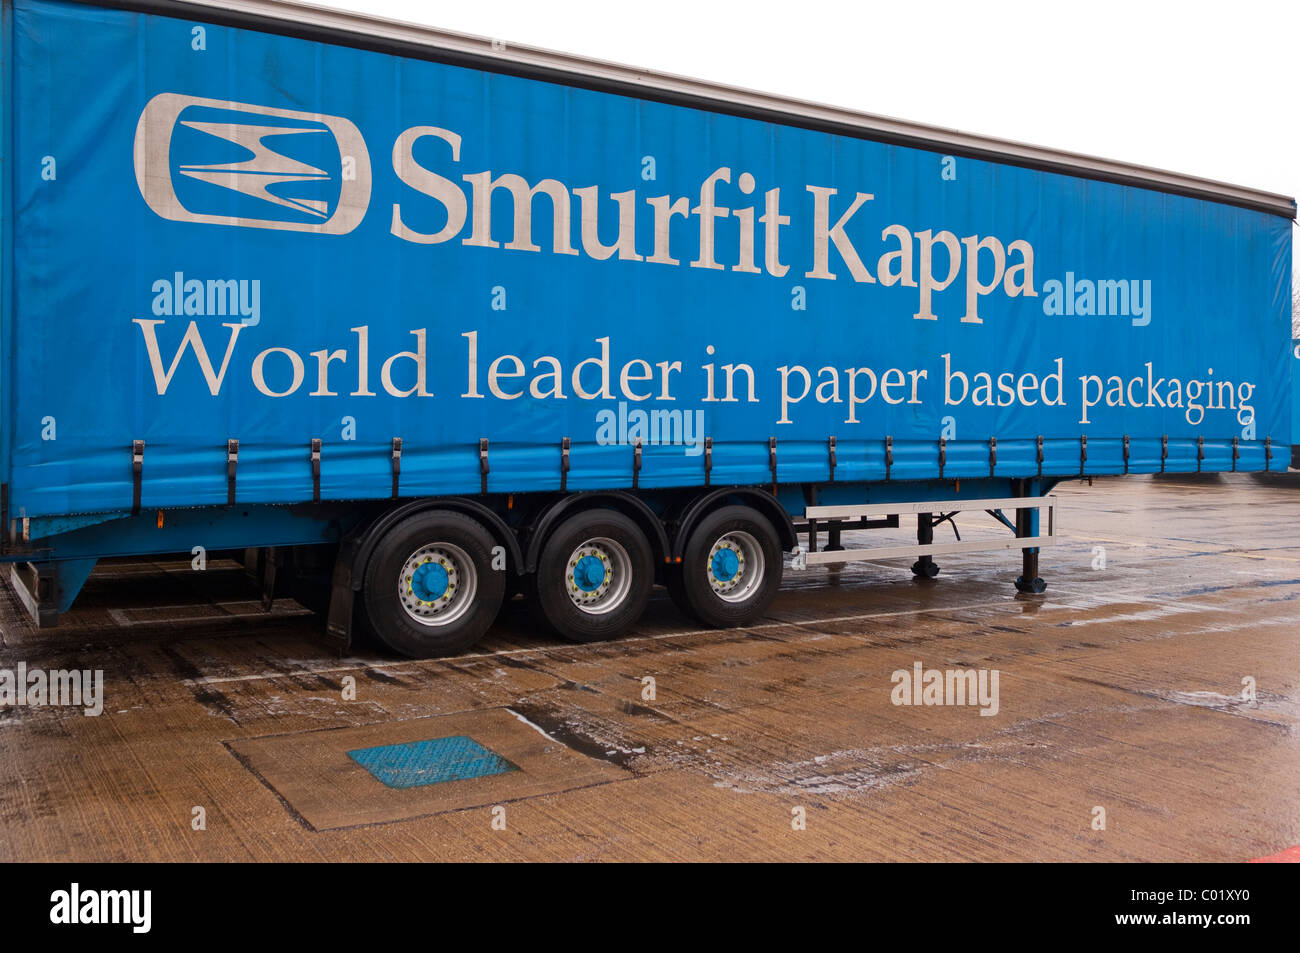 Smurfit High Resolution Stock Photography and Images - Alamy